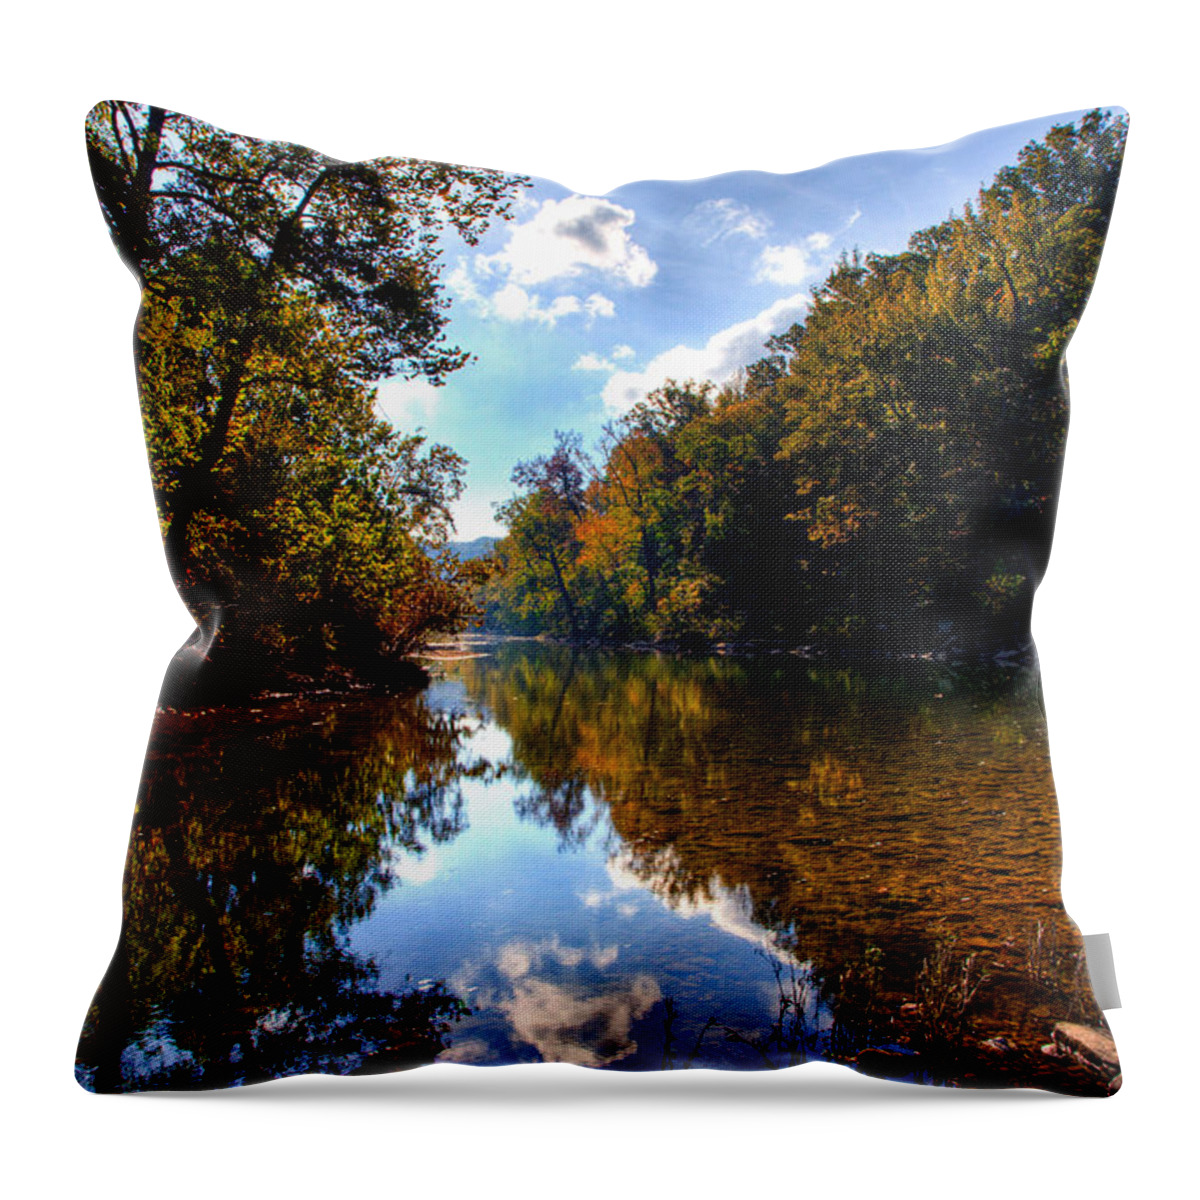 Ozark Campground Throw Pillow featuring the photograph Downriver at Ozark Campground by Michael Dougherty